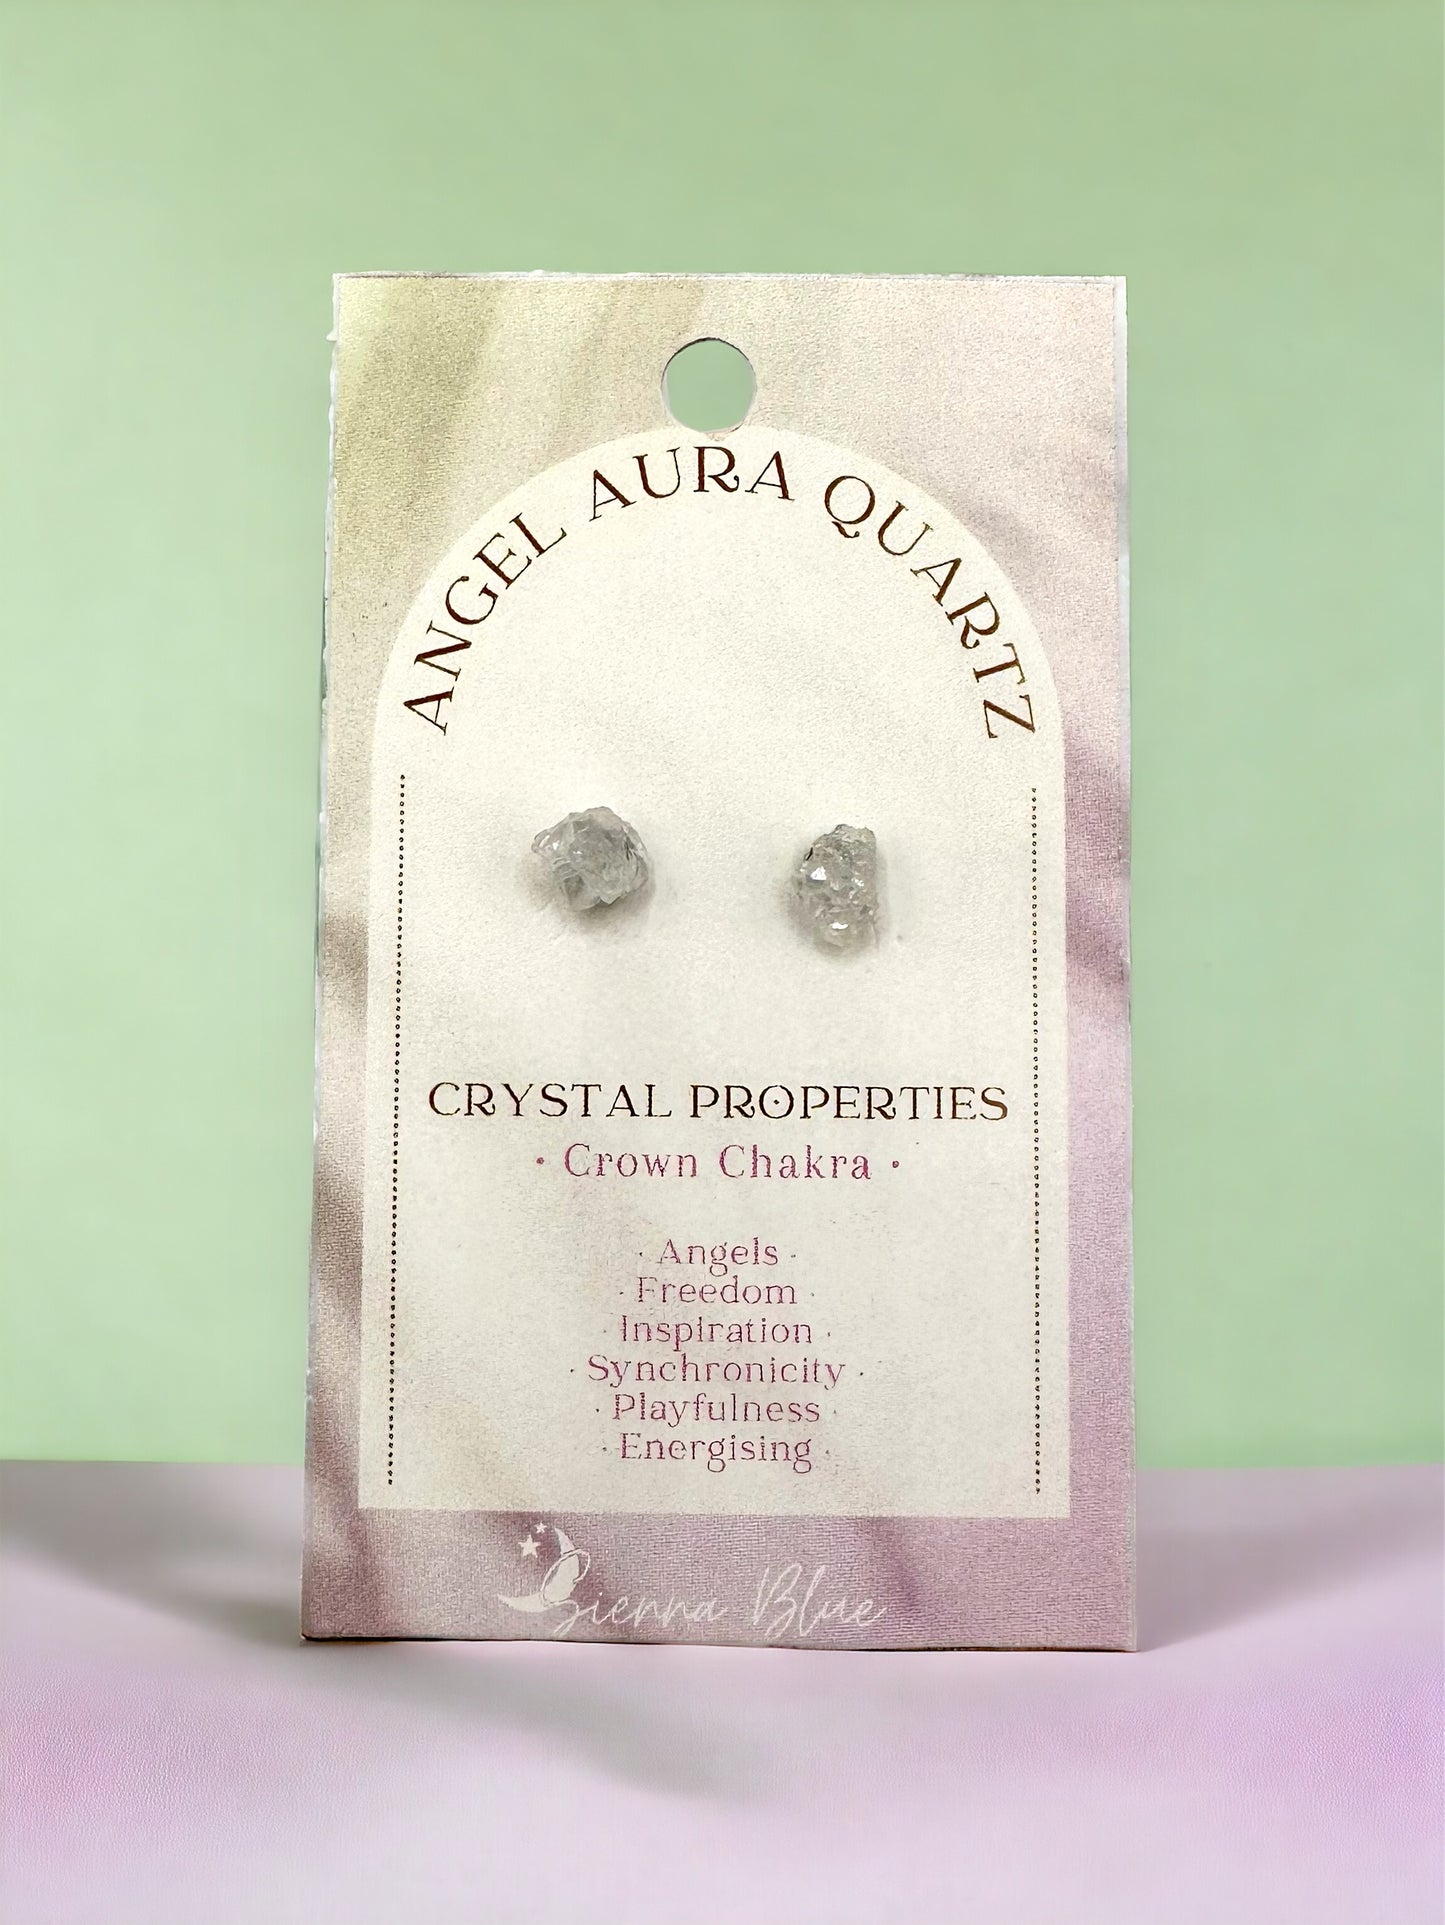 Crystal chip earrings, small studs